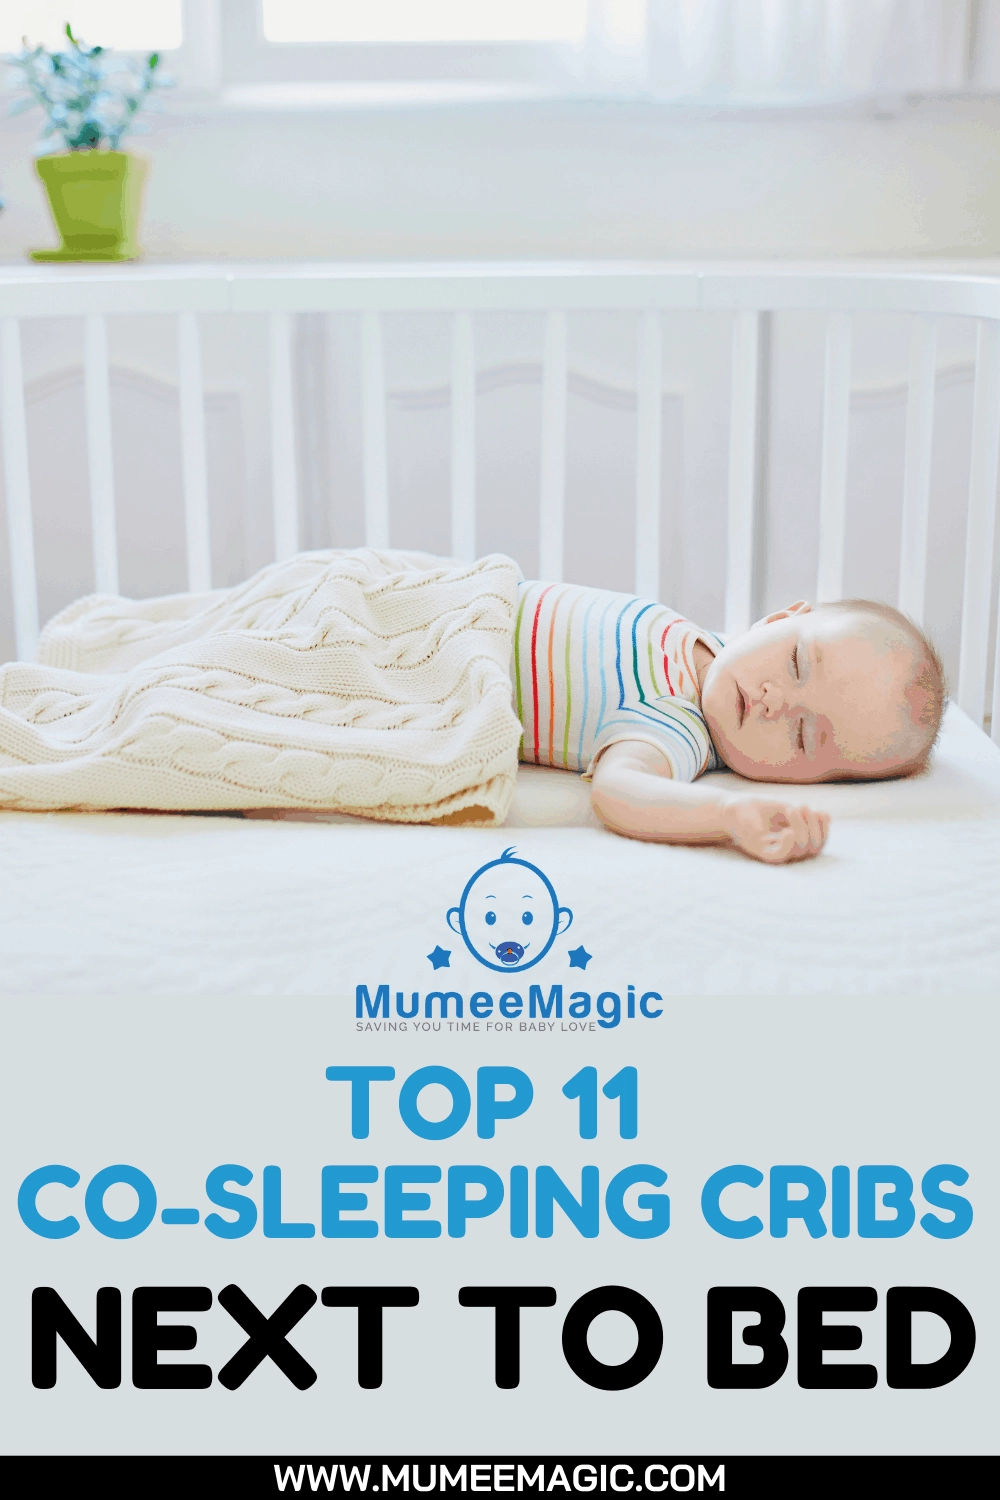 co-sleeping cribs next to bed